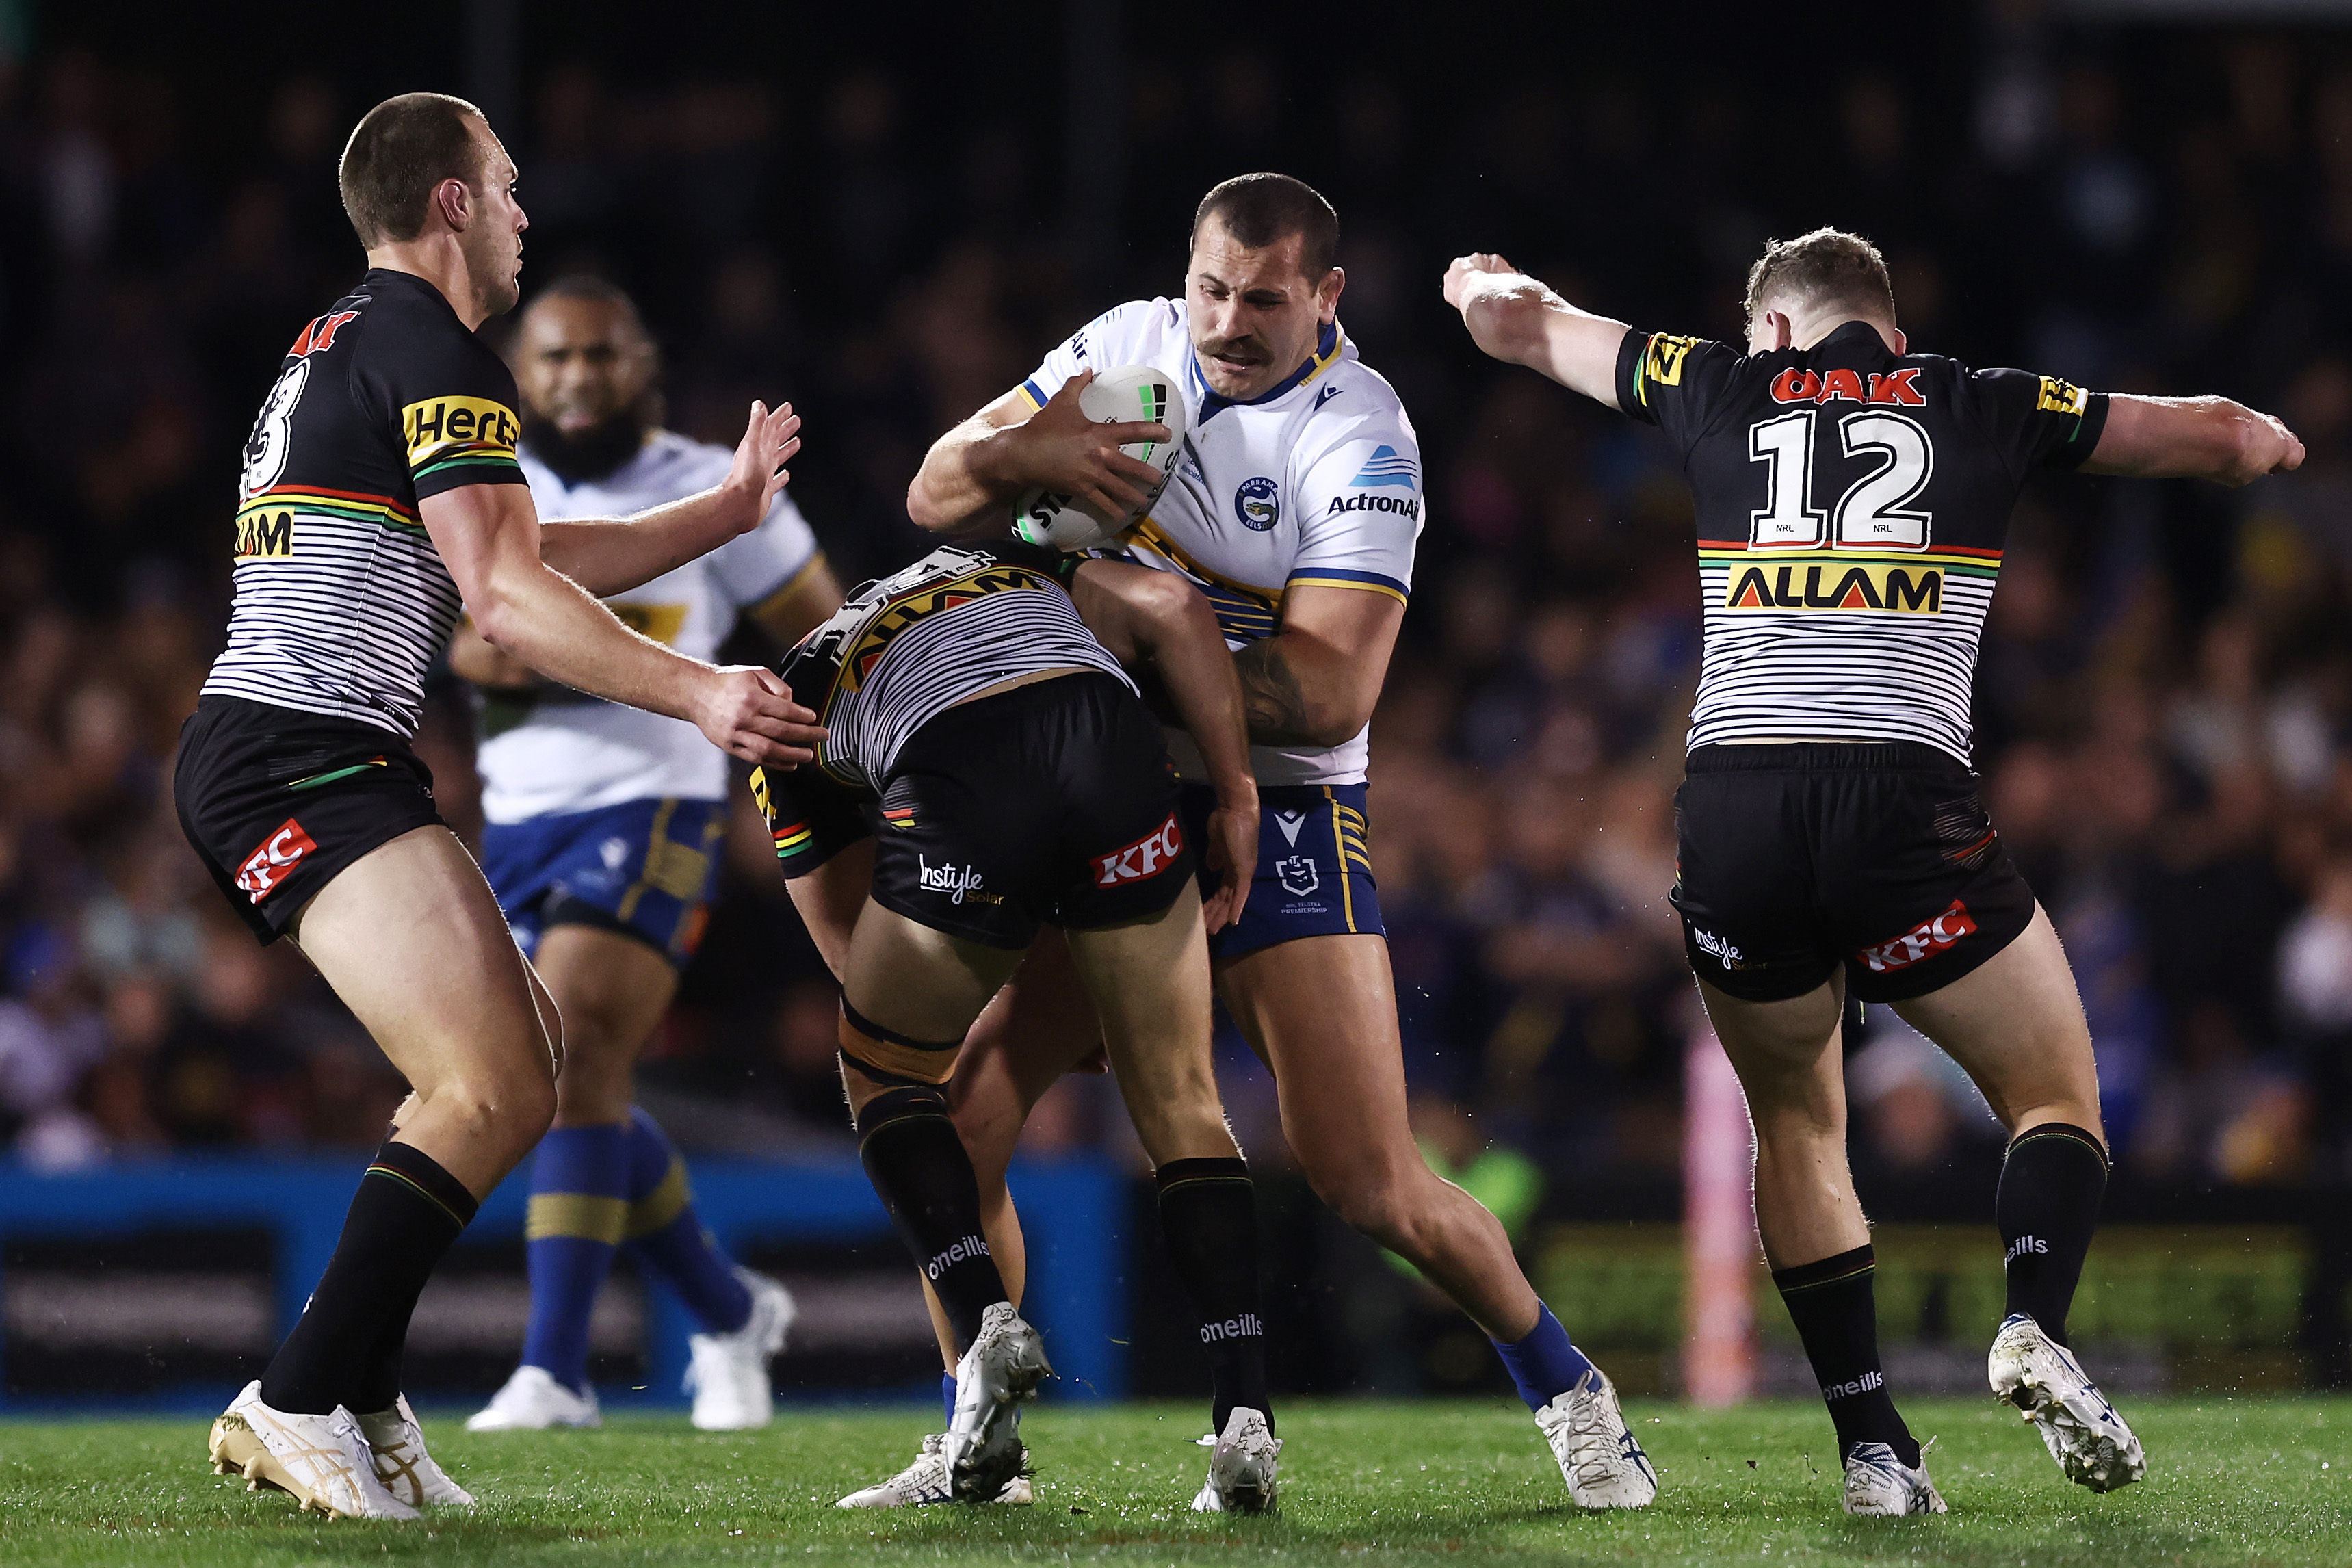 Reagan Campbell-Gillard is tackled during the NRL Qualifying Final match between the Penrith Panthers and the Parramatta Eels at BlueBet Stadium on September 09, 2022 in Penrith, Australia. (Photo by Matt King/Getty Images)